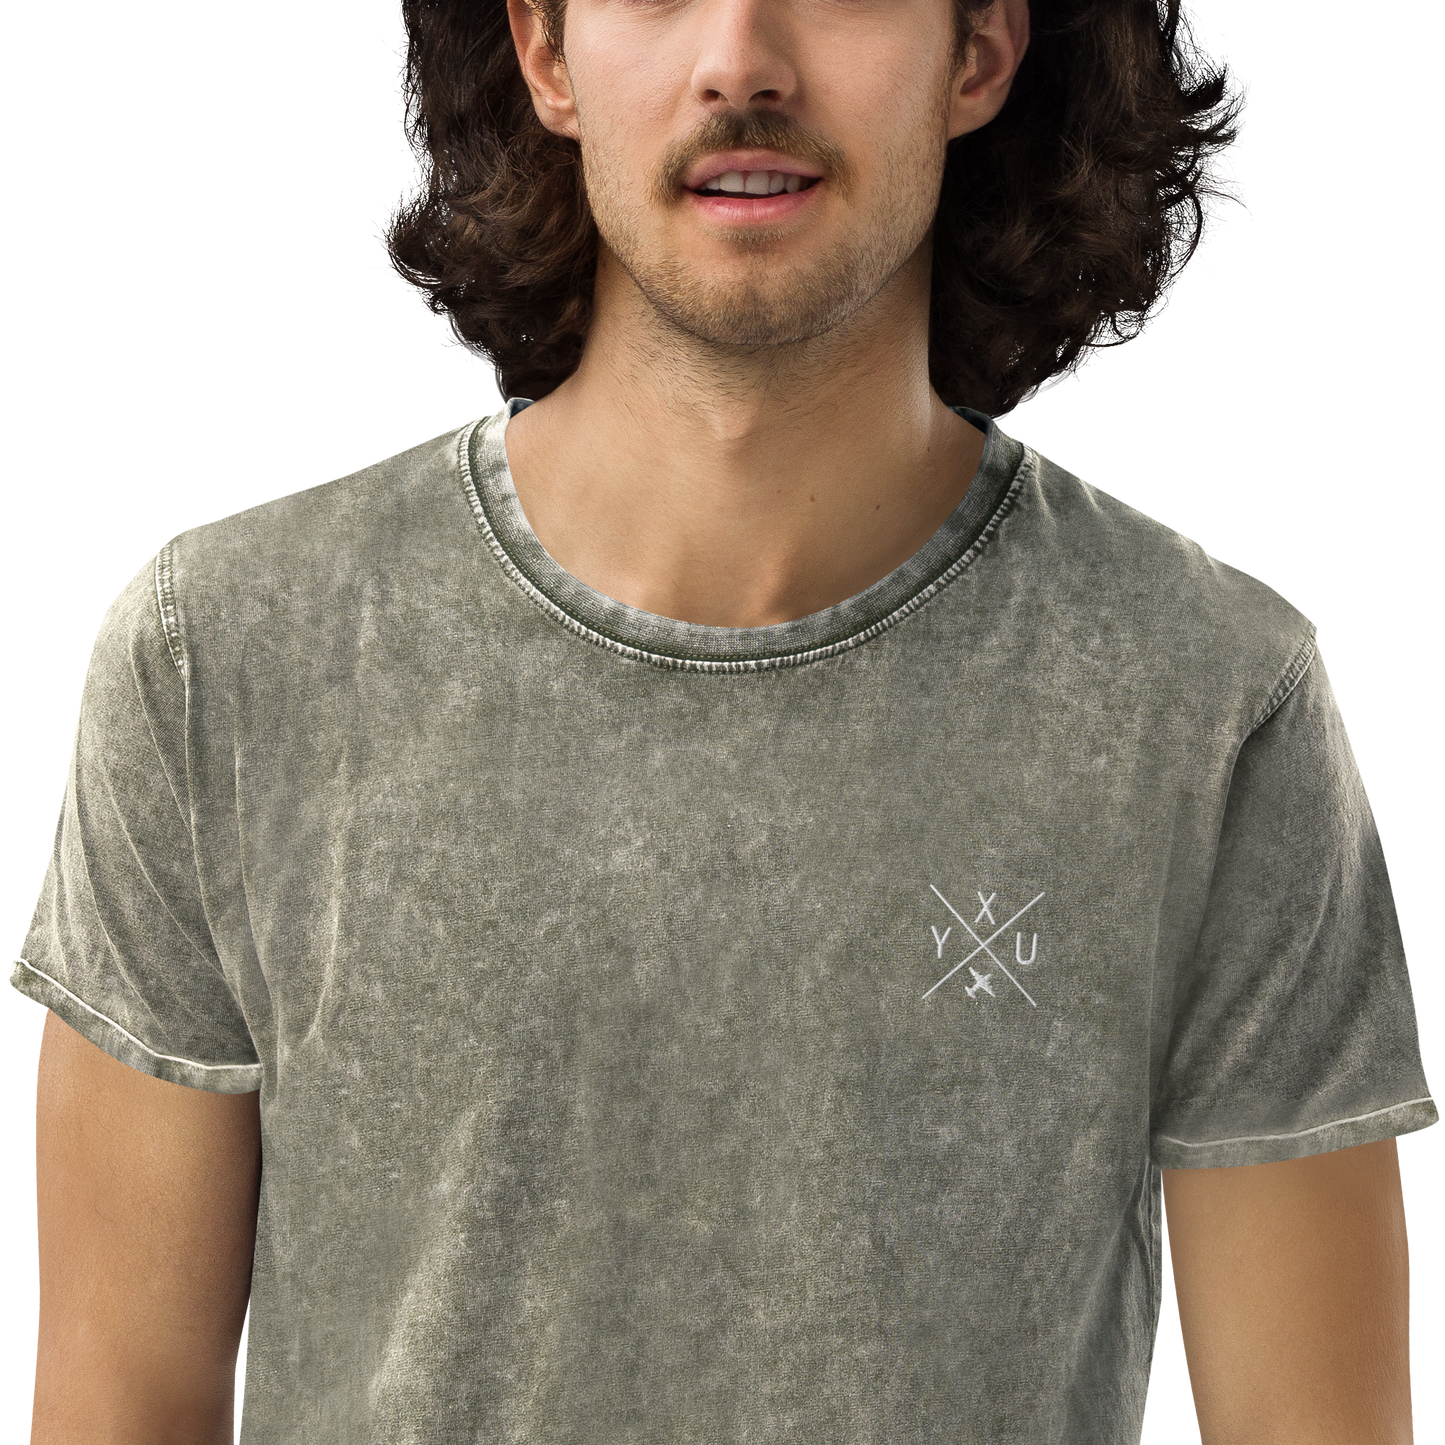 YHM Designs - YXU London Denim T-Shirt - Crossed-X Design with Airport Code and Vintage Propliner - White Embroidery - Image 11